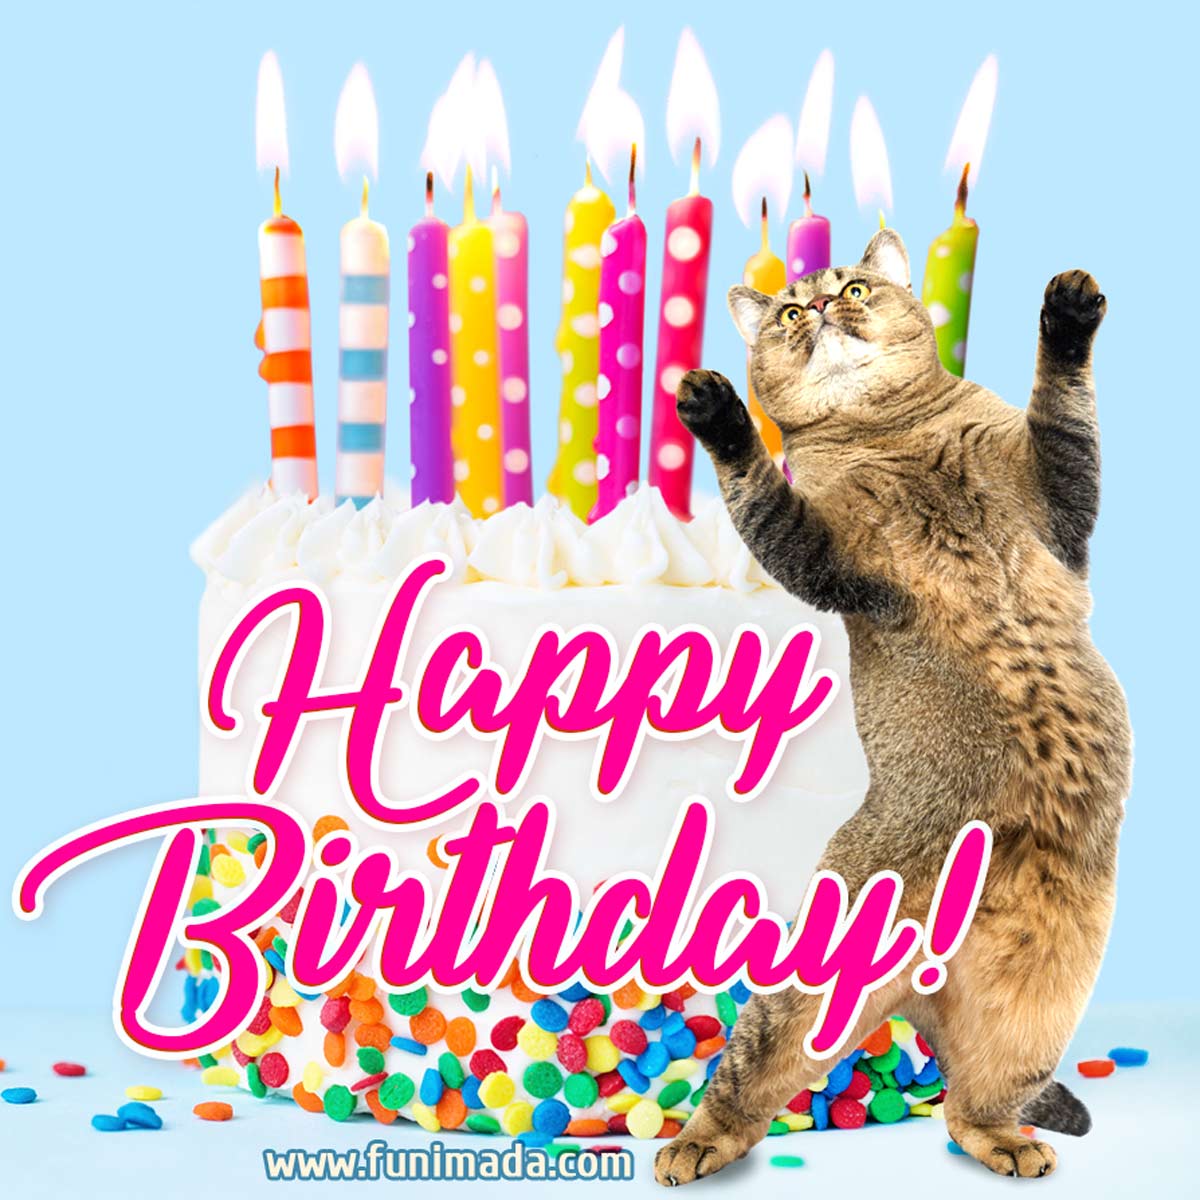 Fun and festive happy birthday image: yummy cake and funny dancing cat